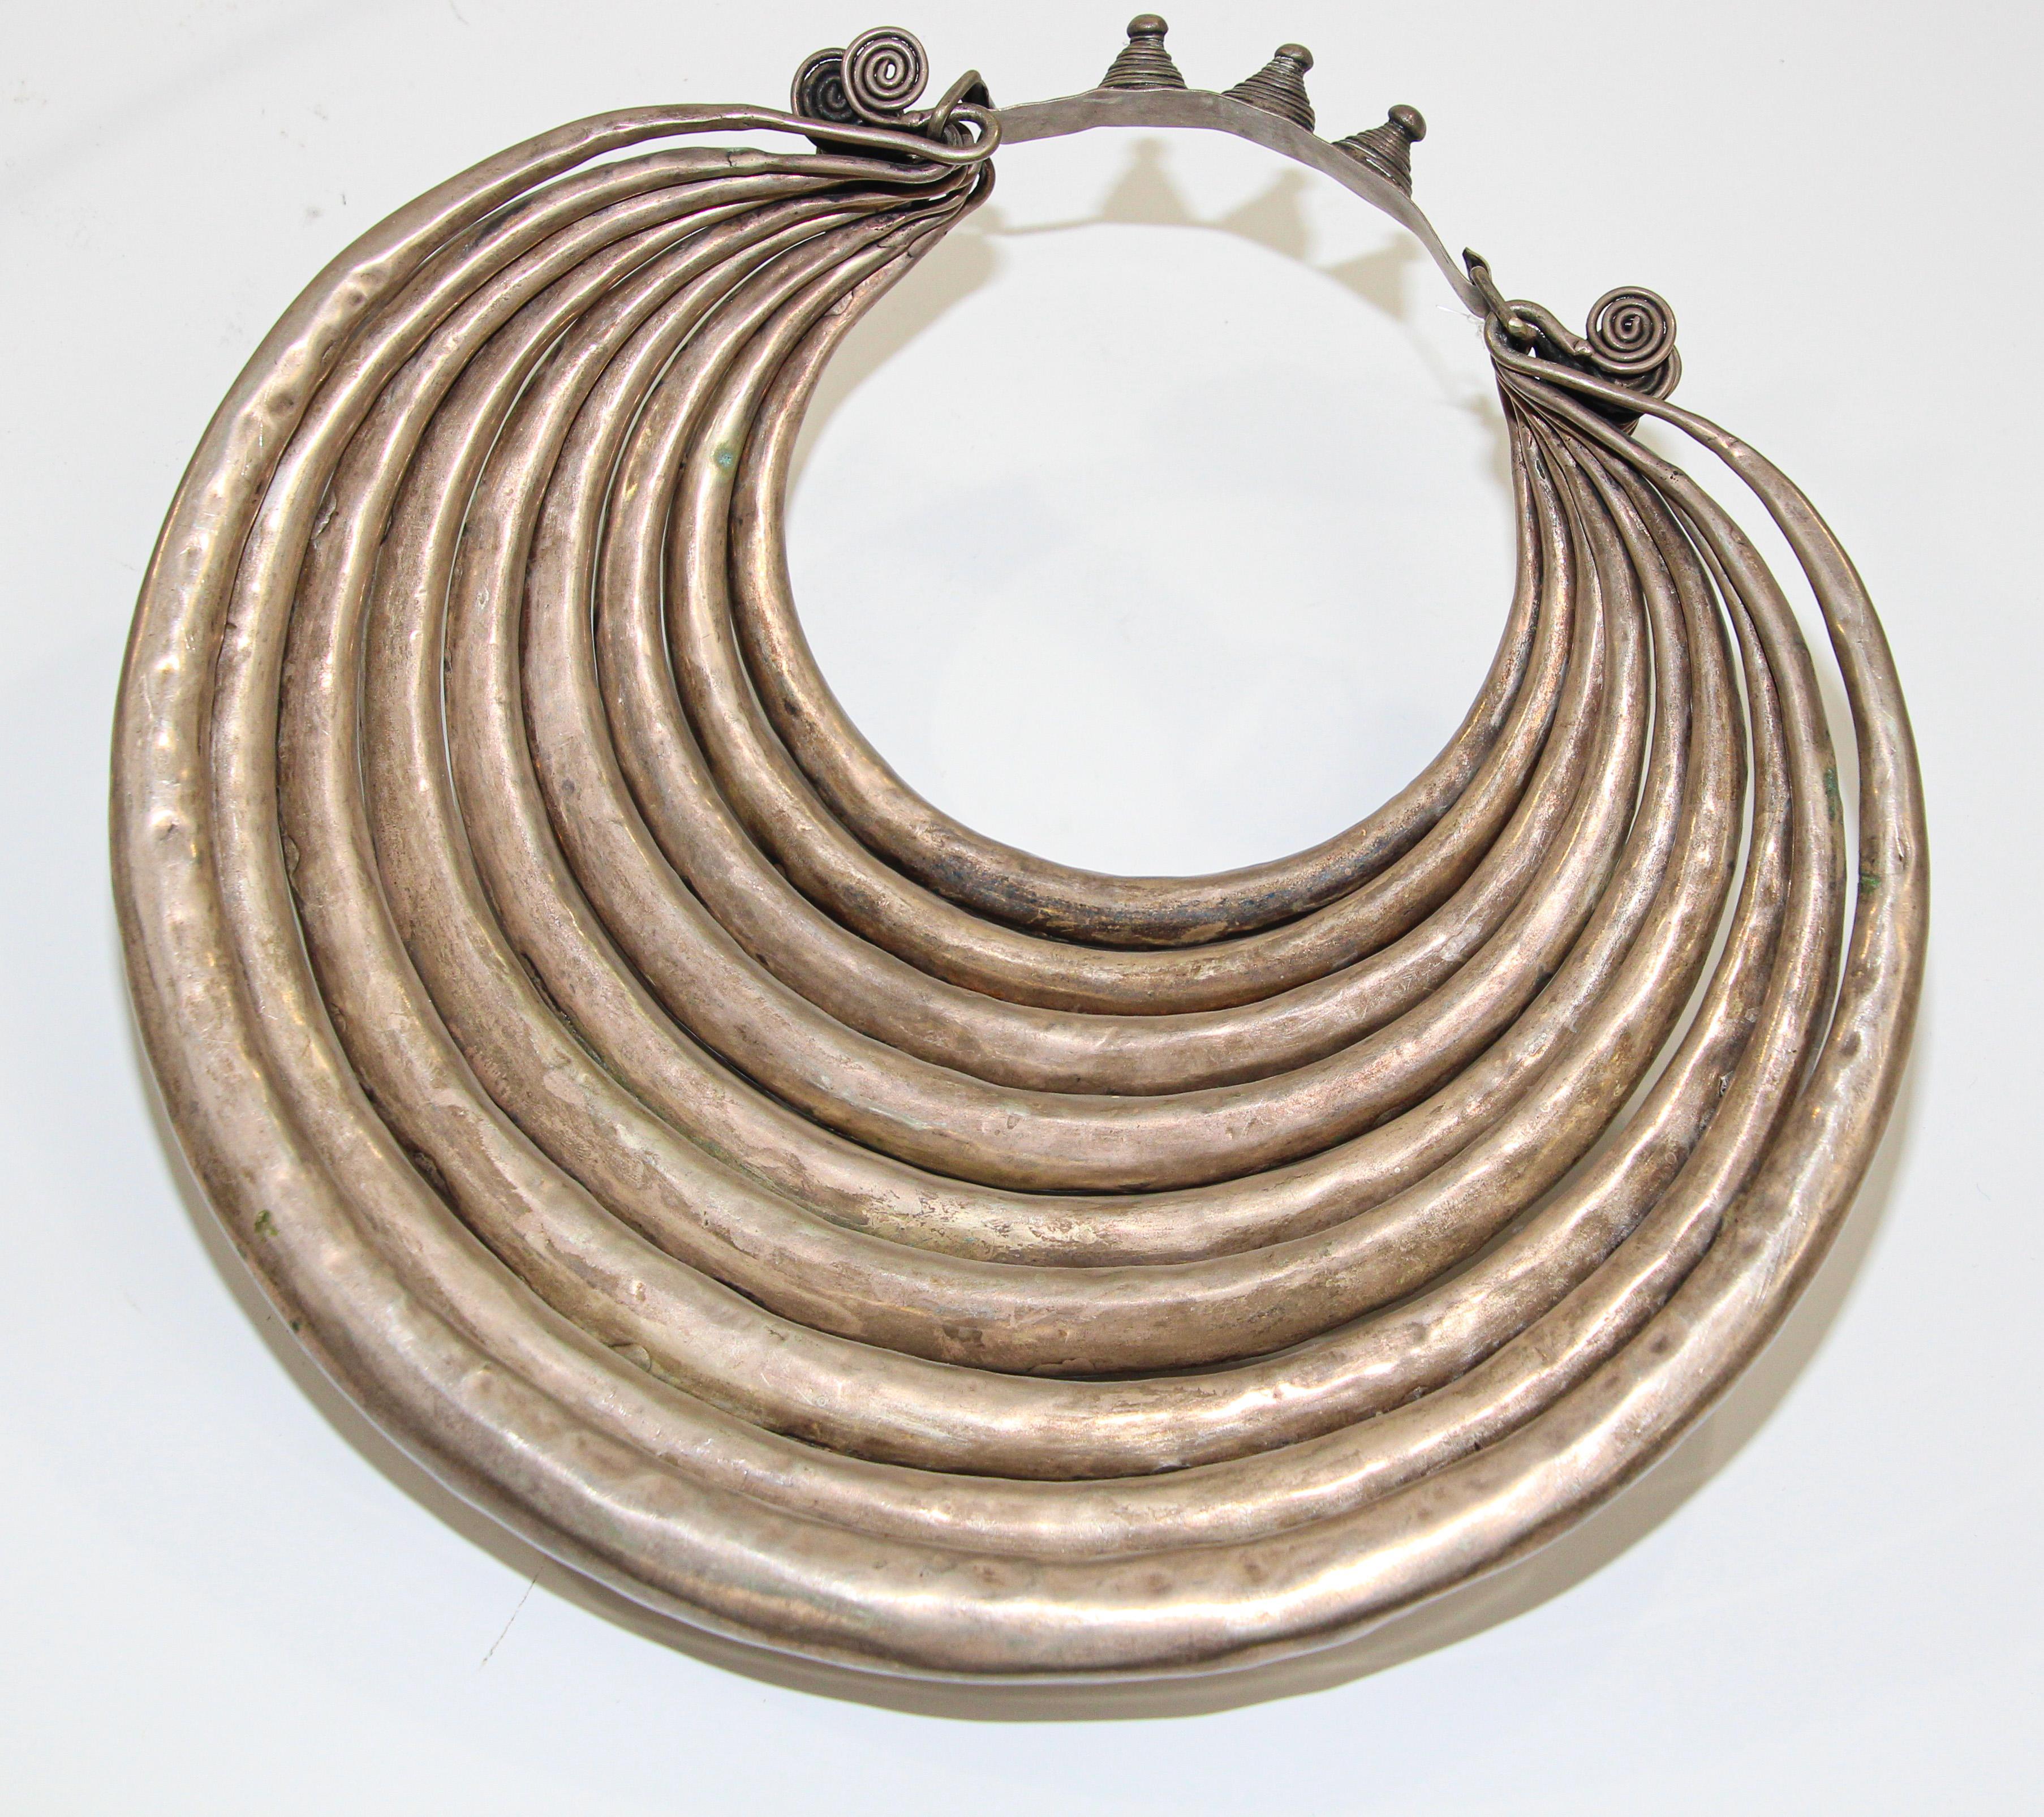 Vintage Miao Paktong Ceremonial Collar Necklace on Stand, Laos 7